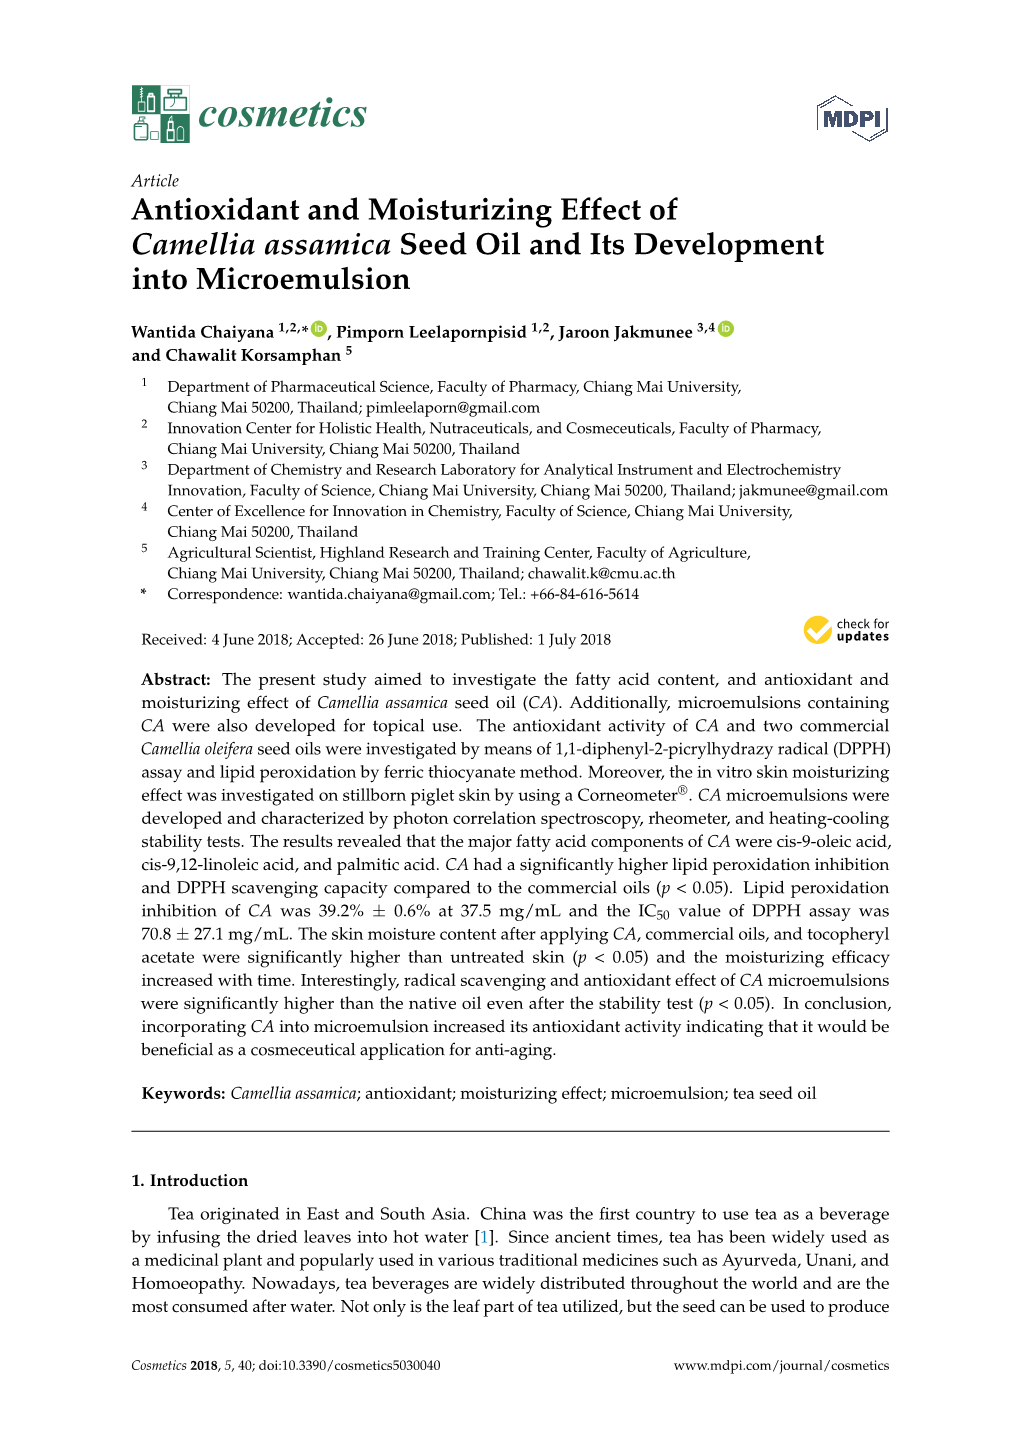 Antioxidant and Moisturizing Effect of Camellia Assamica Seed Oil and Its Development Into Microemulsion